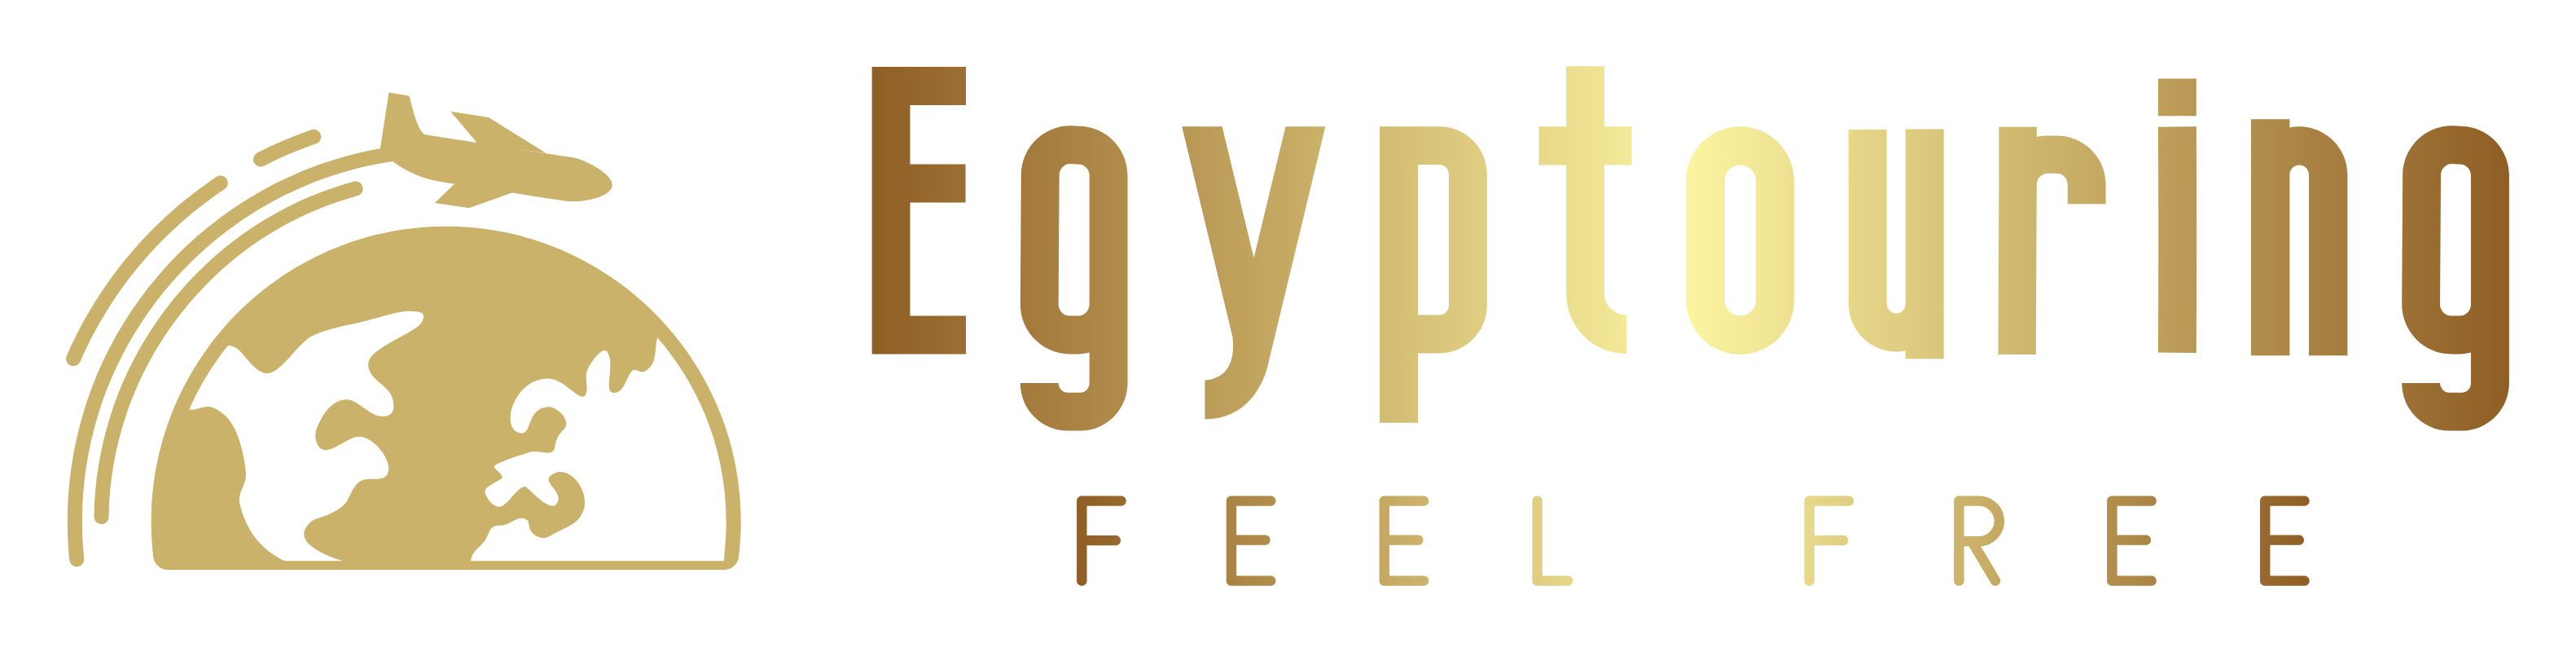 Egypt Day Tours and Travel Packages